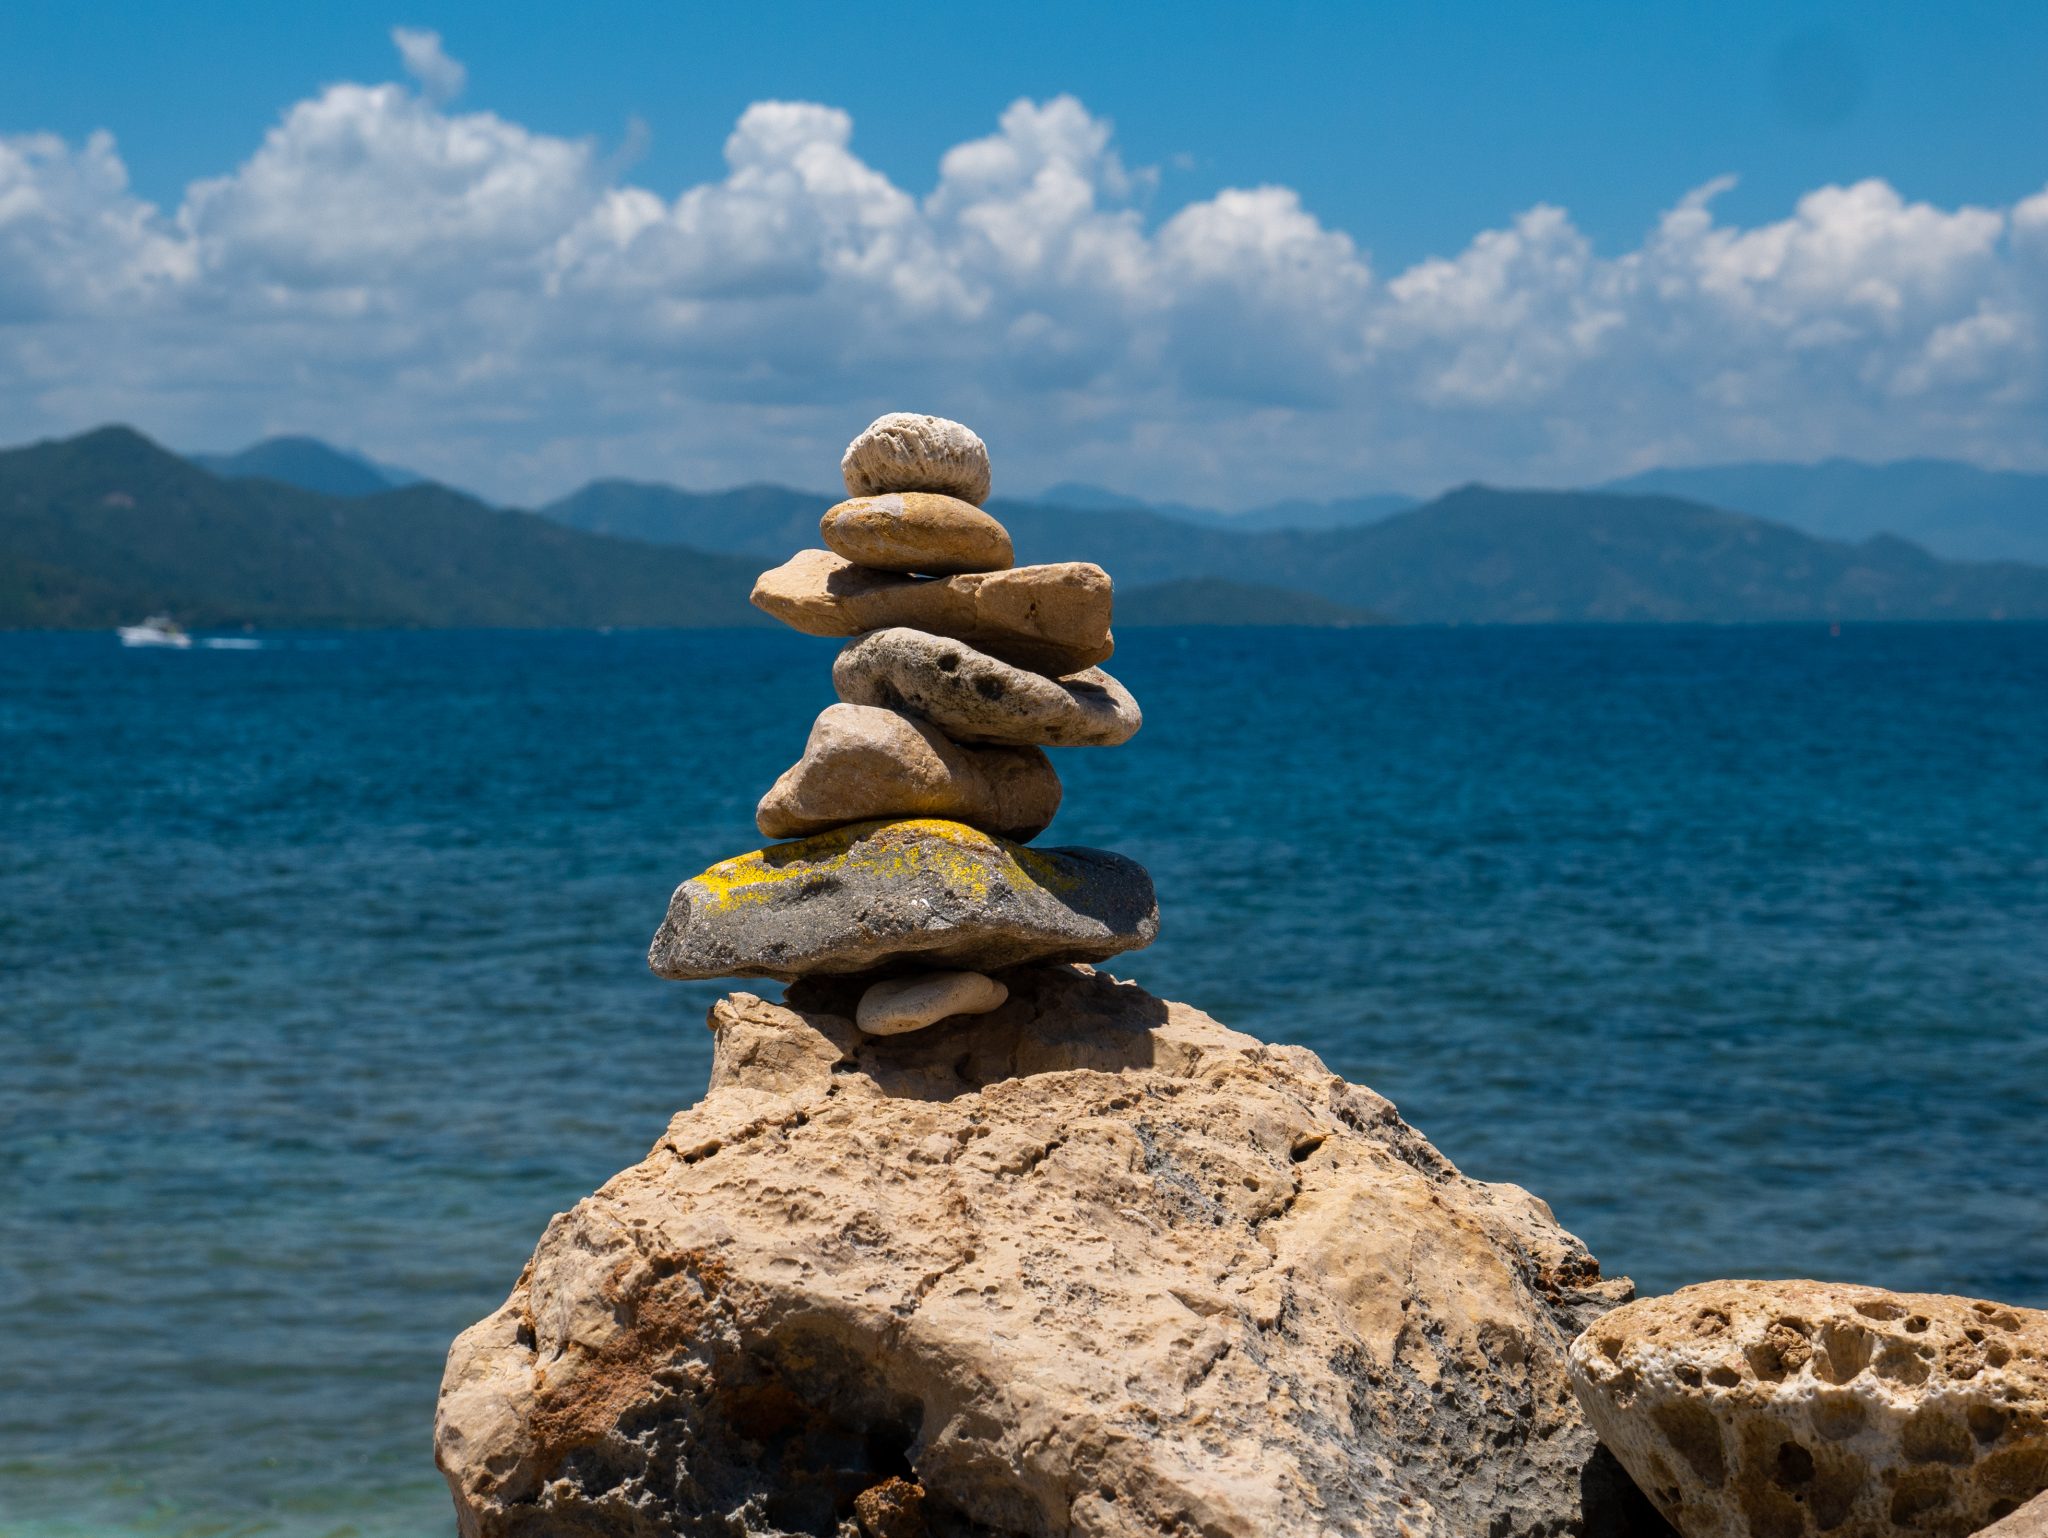 Stacked rocks in the Caribbean along the coast